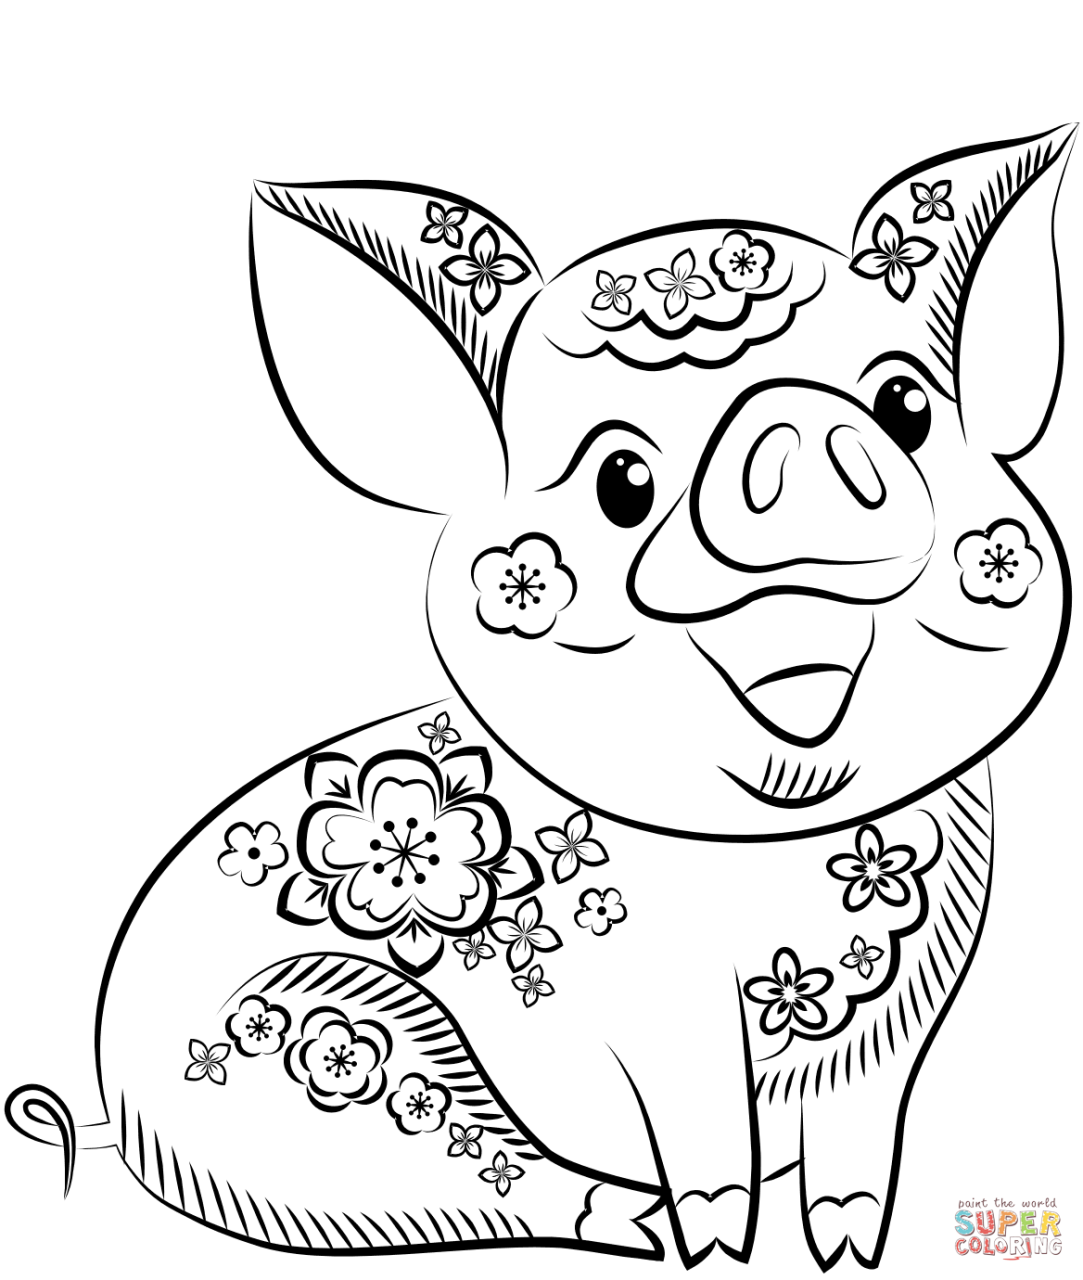 Coloring Pages Of Pigs